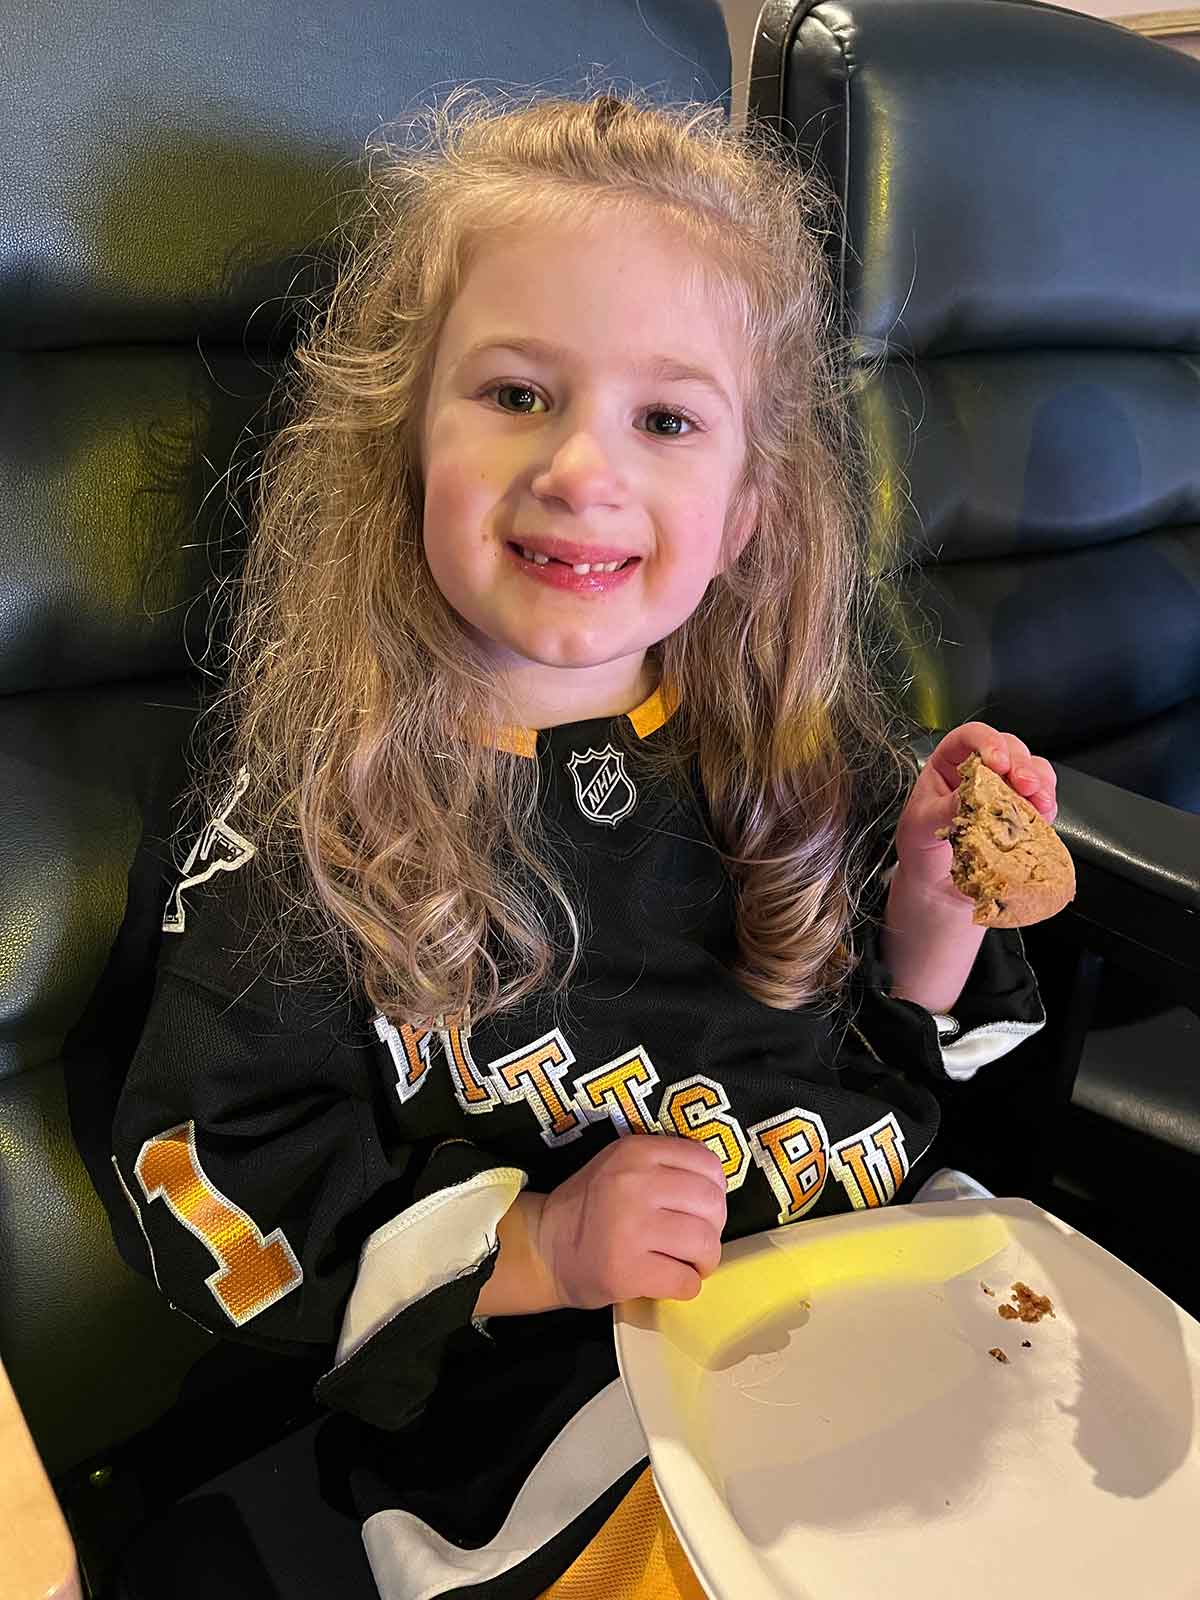 Girl in a hockey jersey eating a chocolate chip cookie.